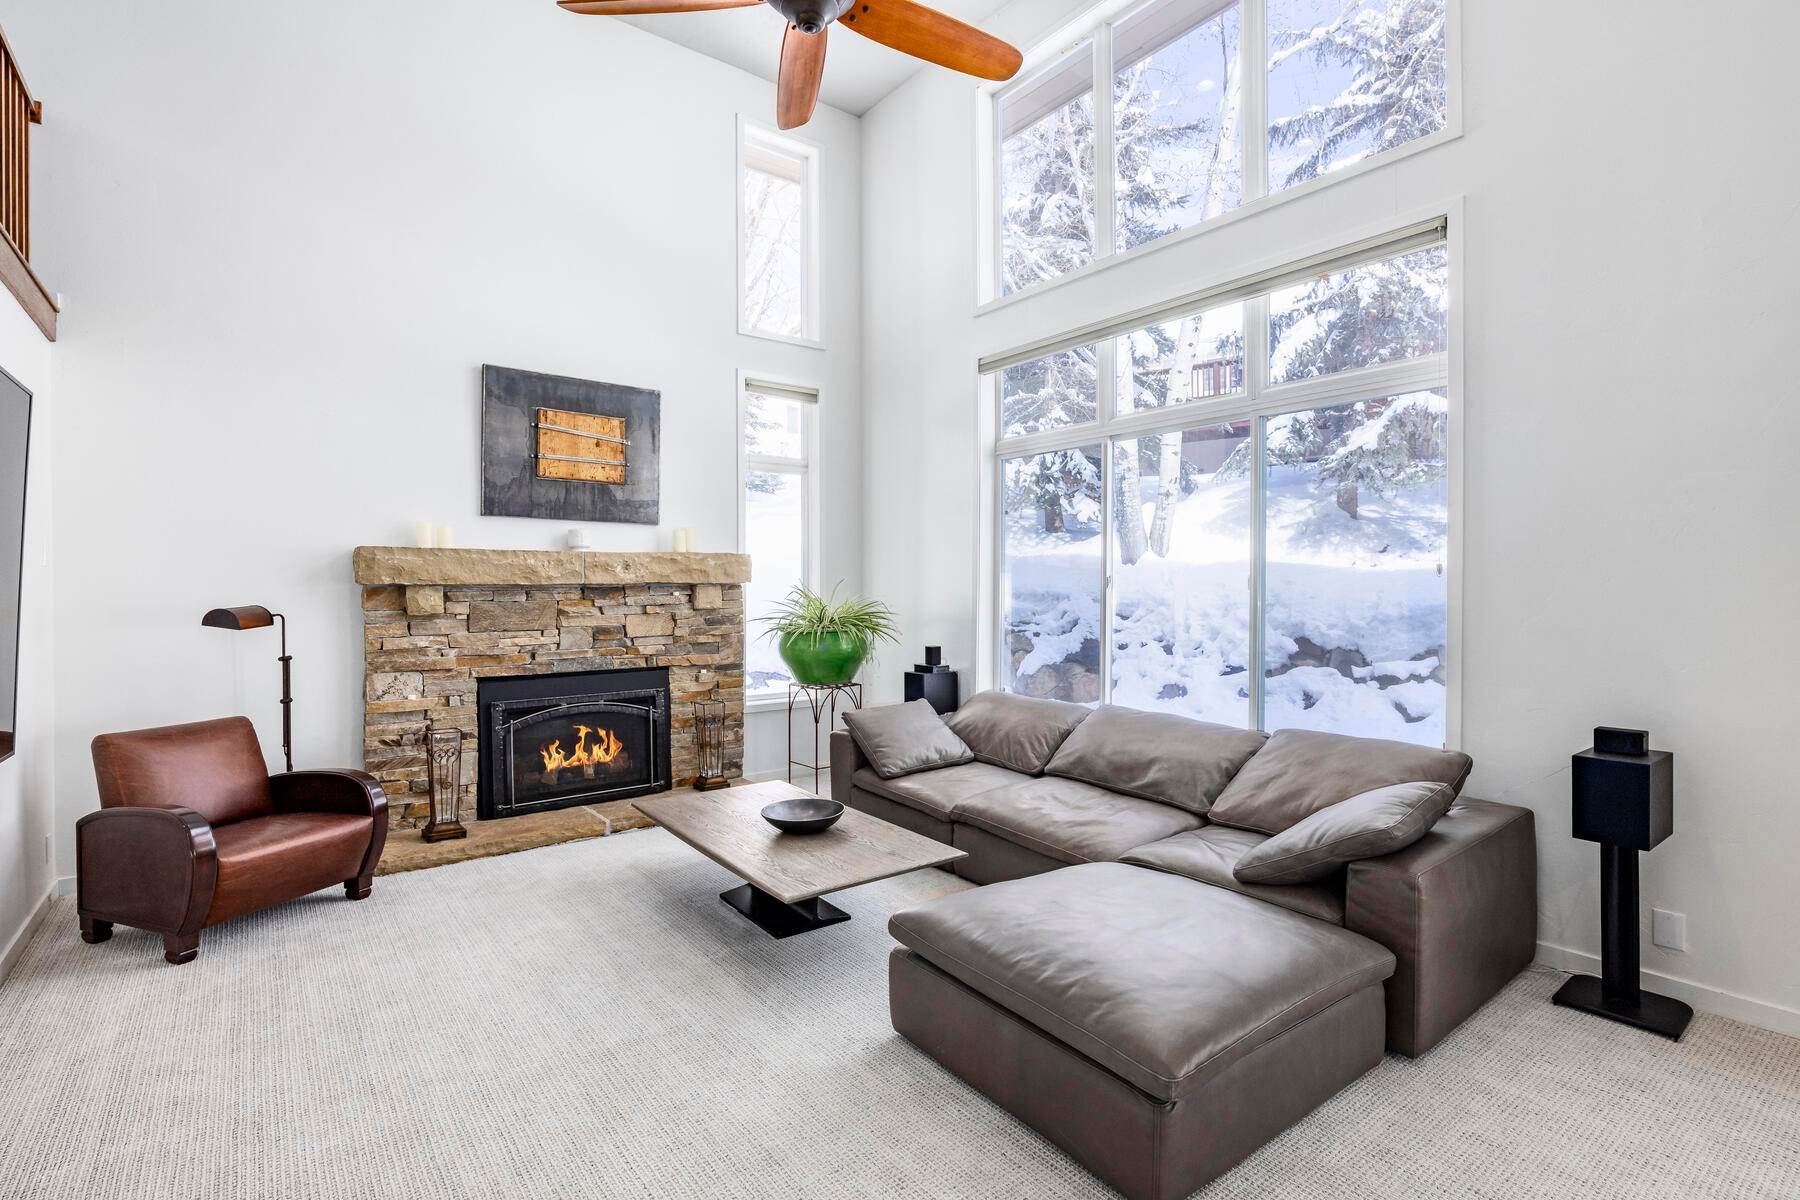 Single Family Homes for Sale at Beautifully Designed Home Close to Everything! 8841 N Cheyenne Way Park City, Utah 84098 United States